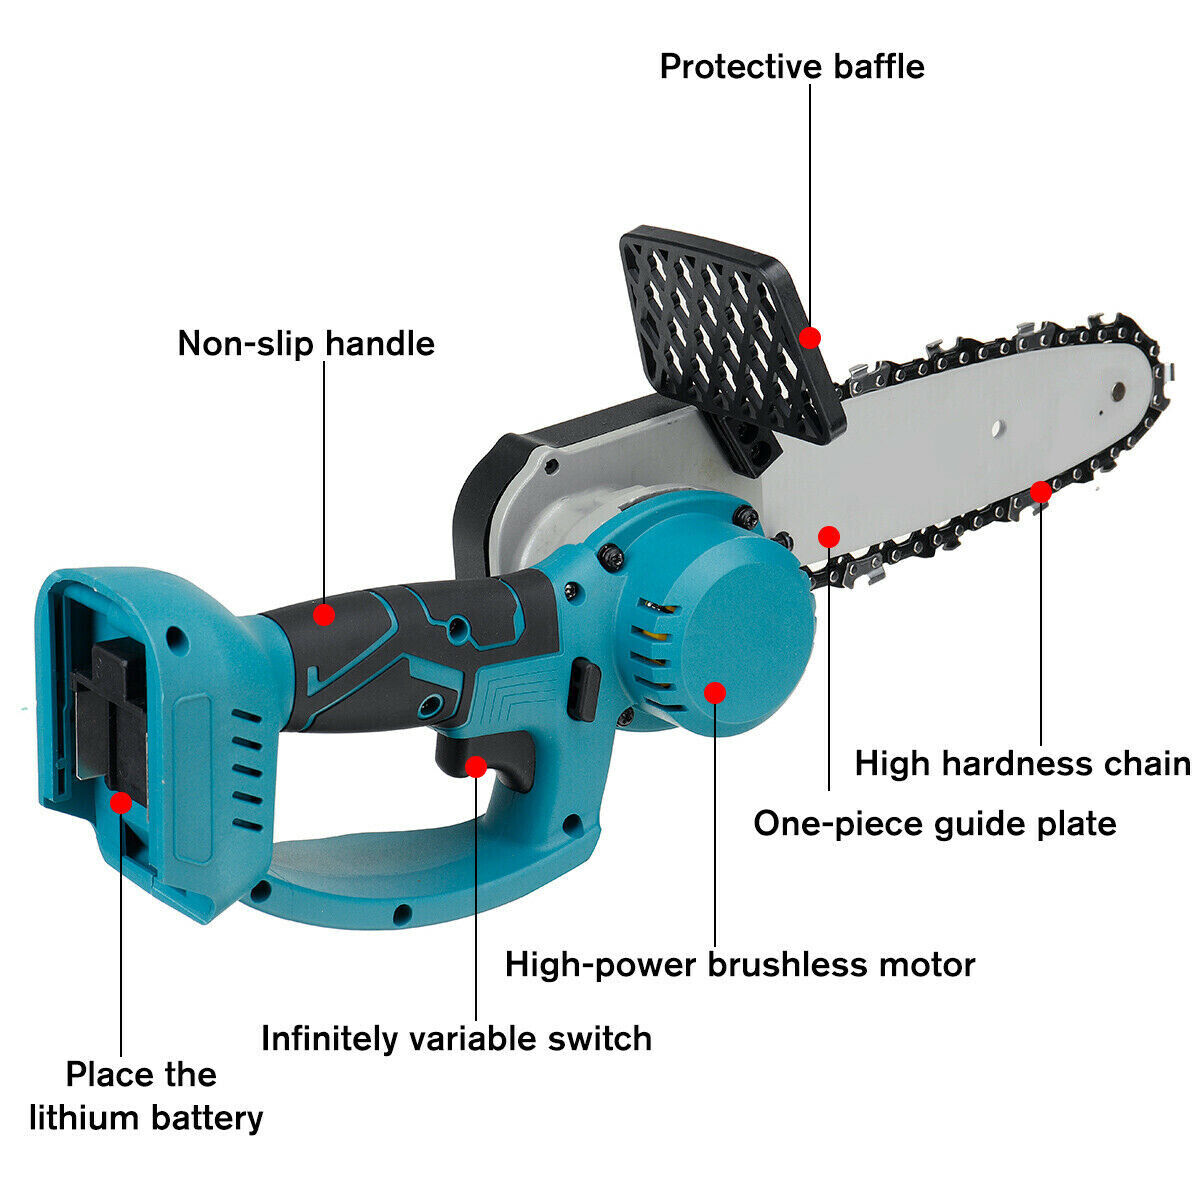 8" & 10" Electric Cordless Chainsaw with 2x Batteries - itoolmax